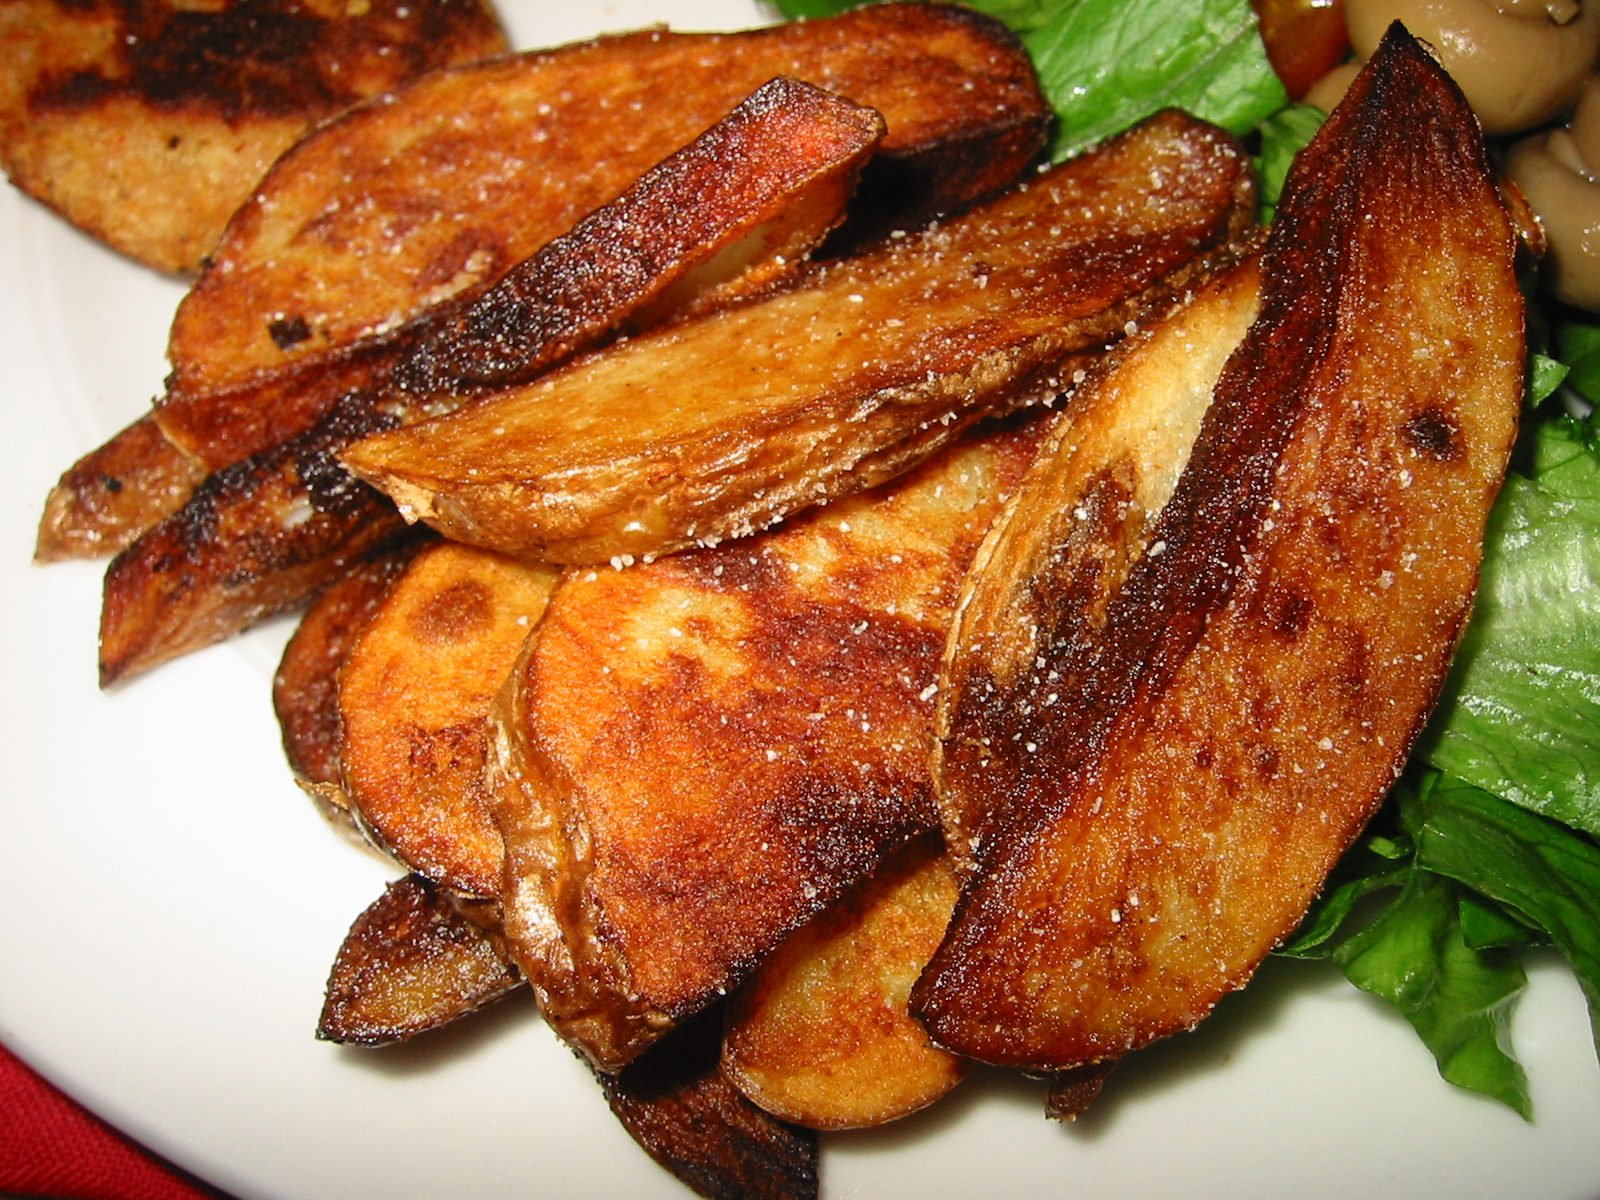 Well done potato wedges